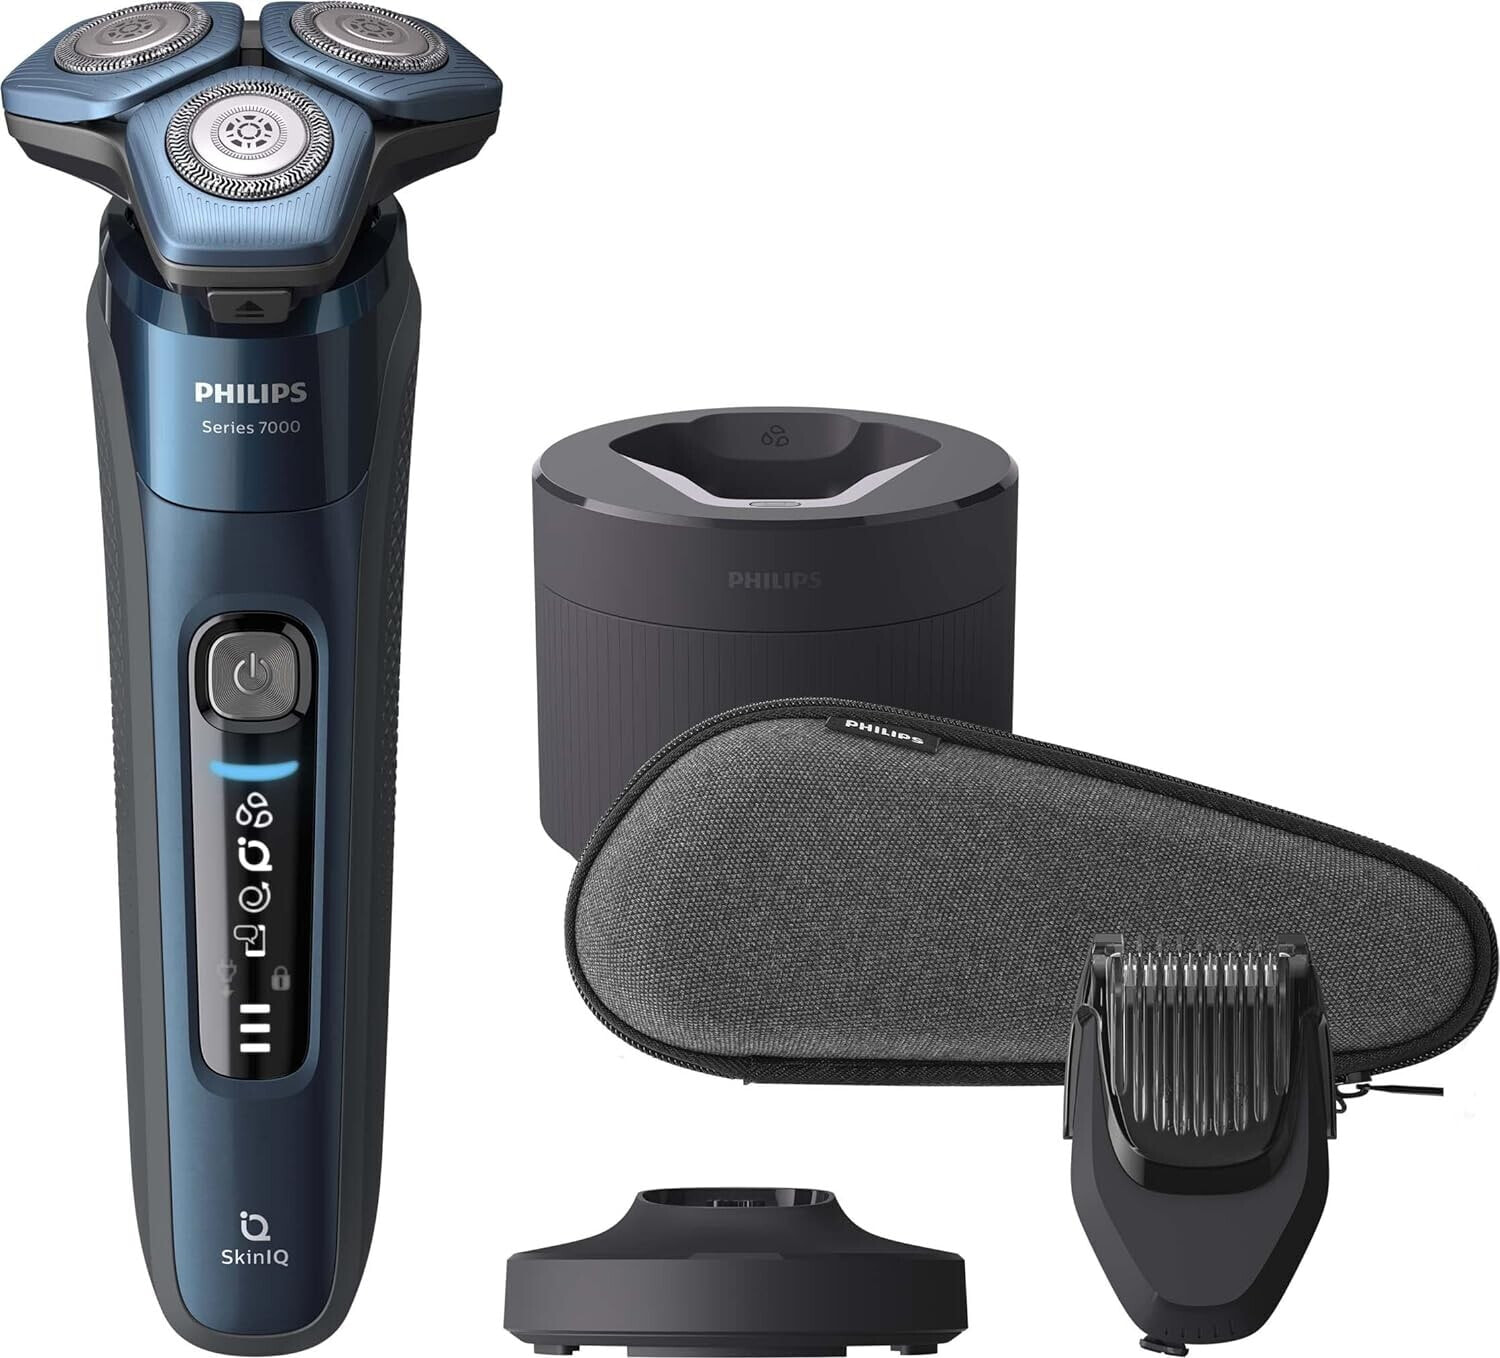 PHILIPS S7786/59 - Wet & Dry Series 7000 Electric Shaver - SkinIQ Technology - SteelPrecision Blades - Blue